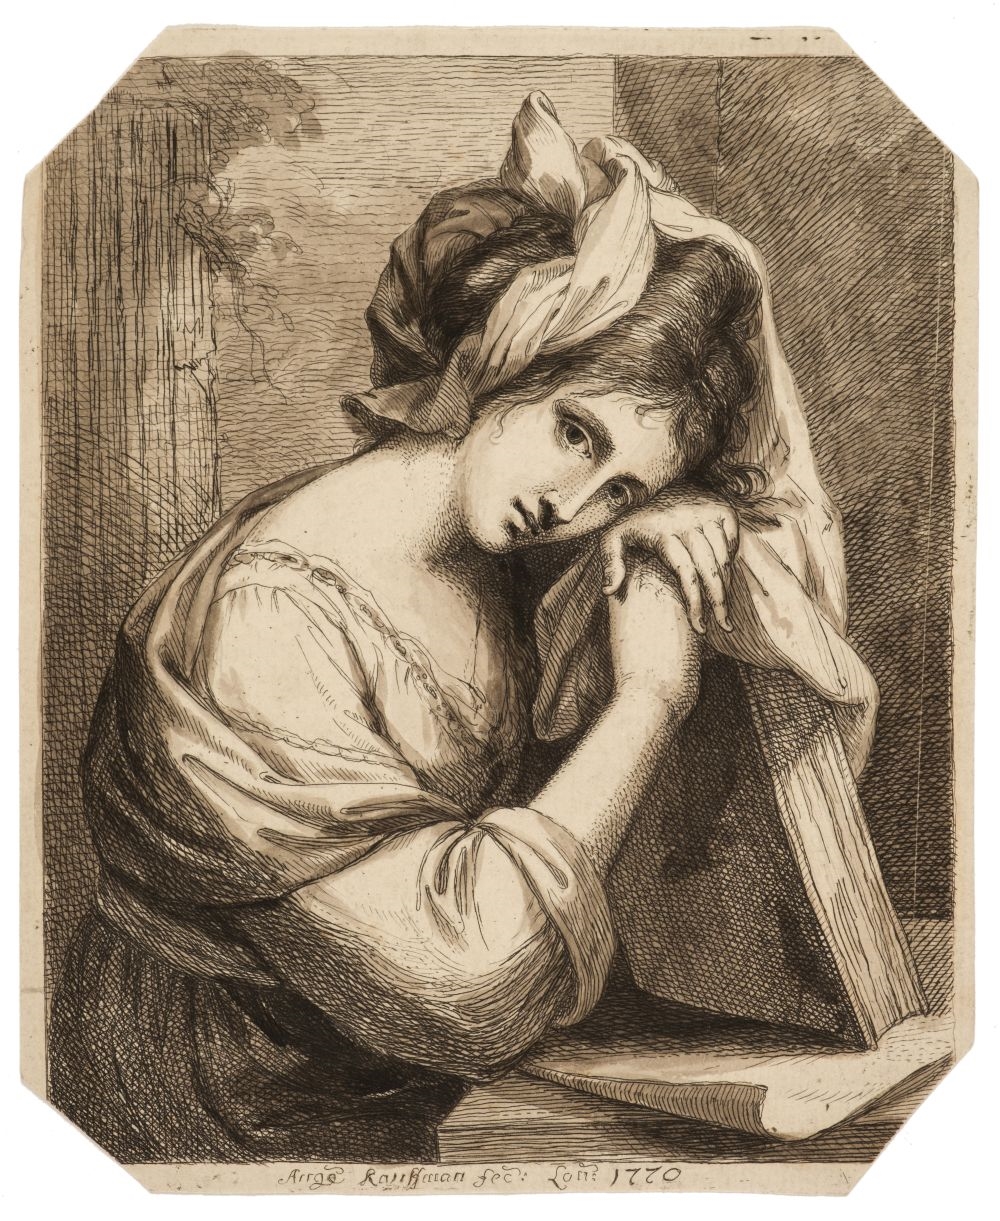 Woman Resting Her Head on a Book by Angelica Kauffmann, 1770